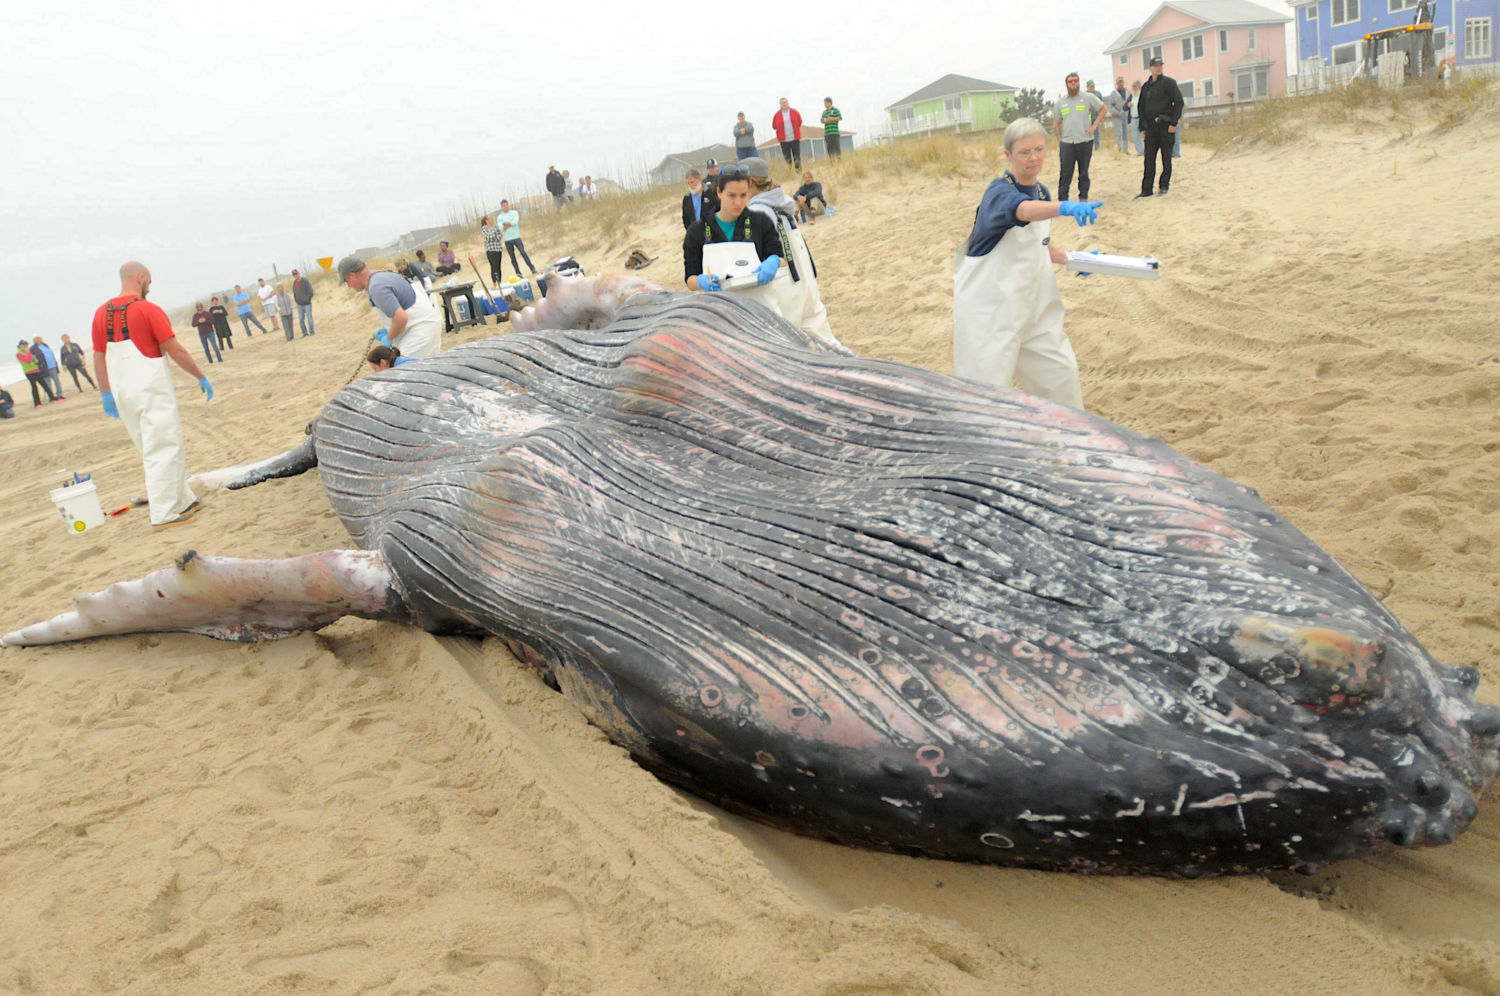 The East Coast Whale Die-Offs: Unraveling the Causes - Yale E360